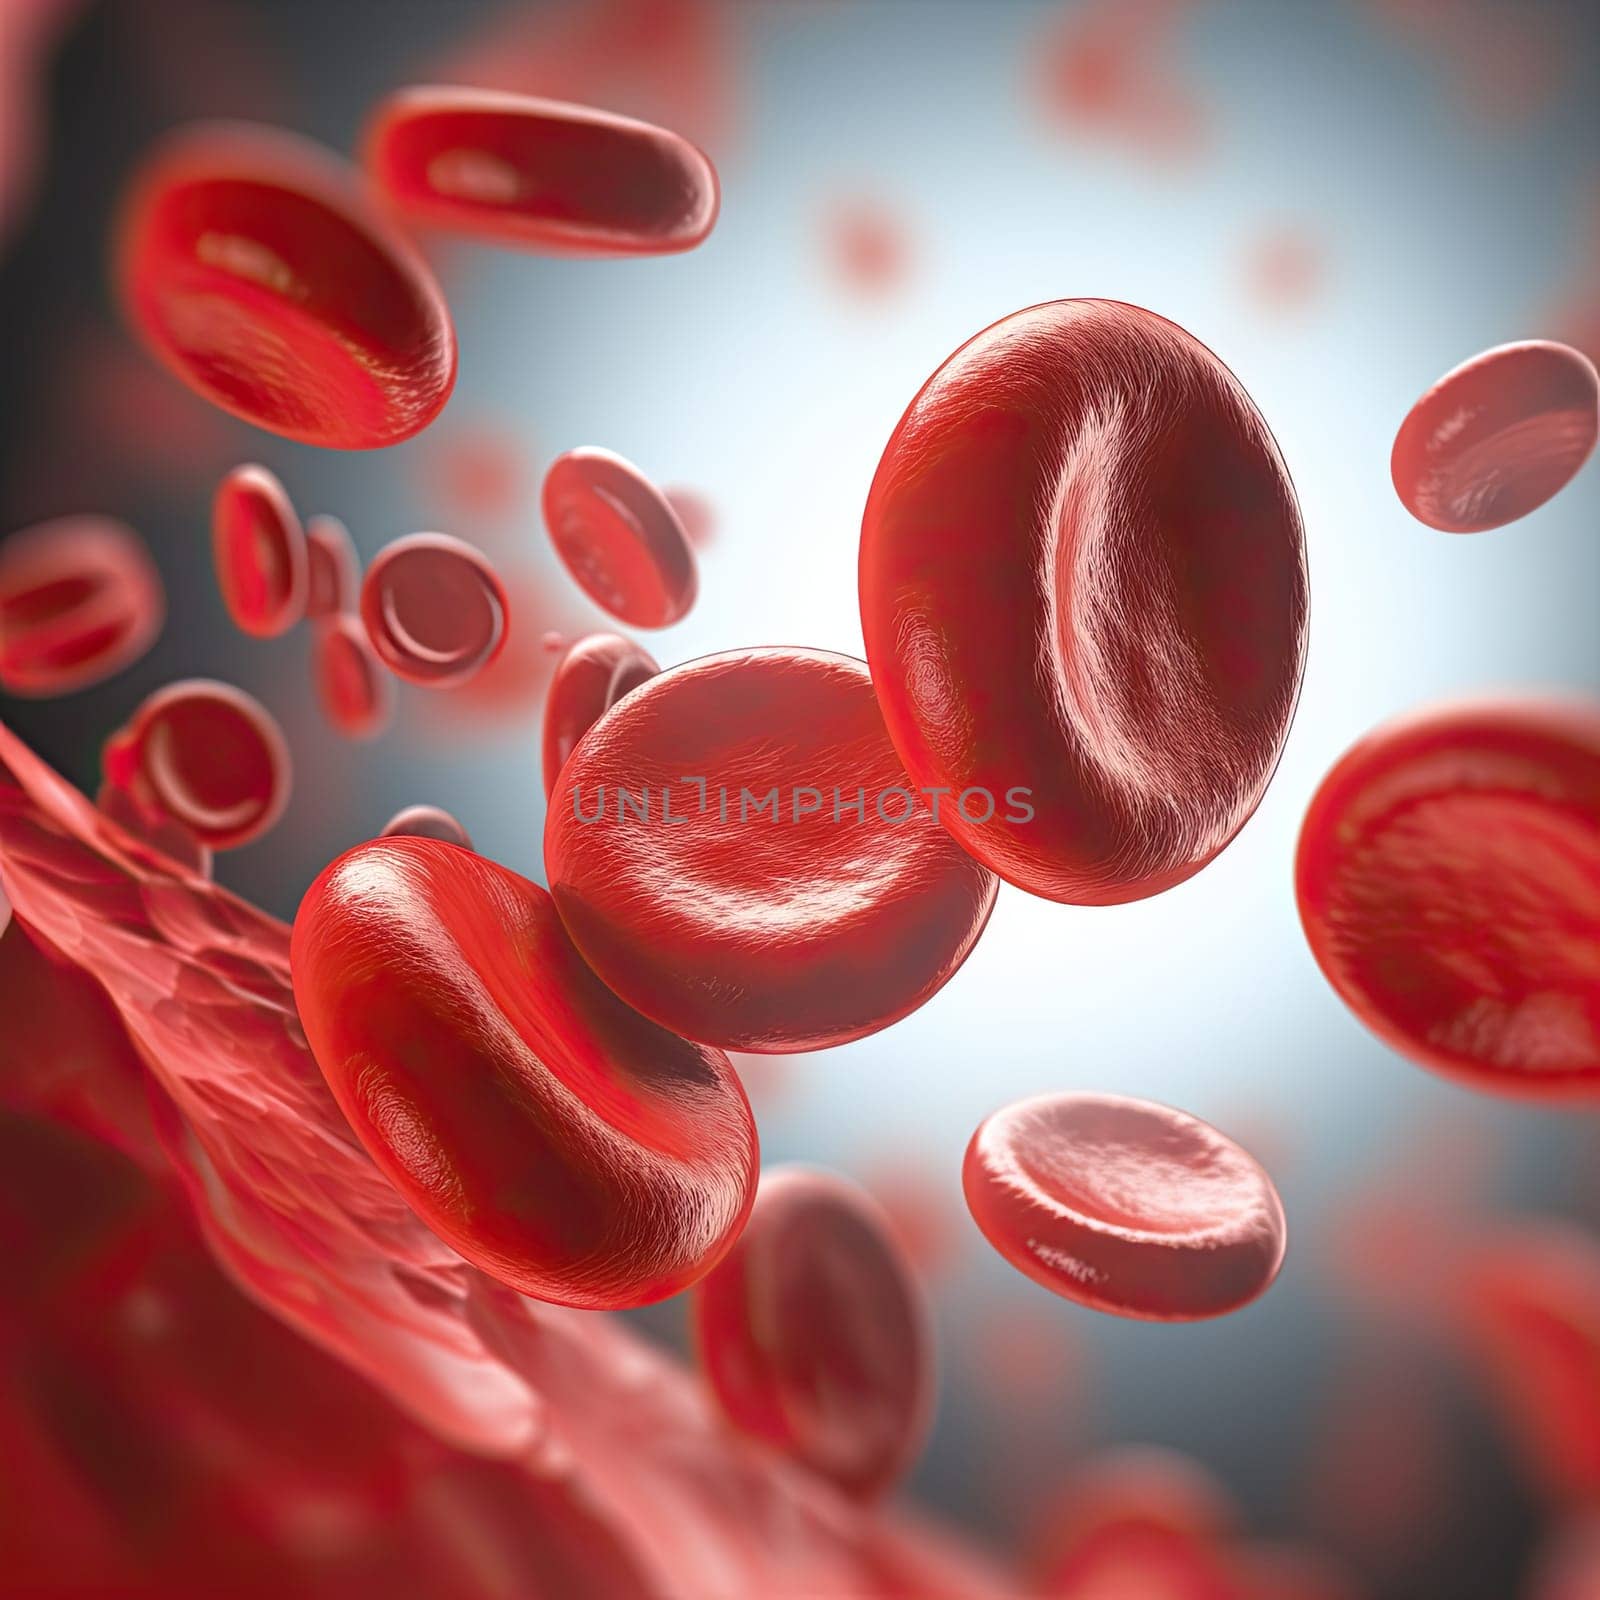 red blood cells isolated on bright background.